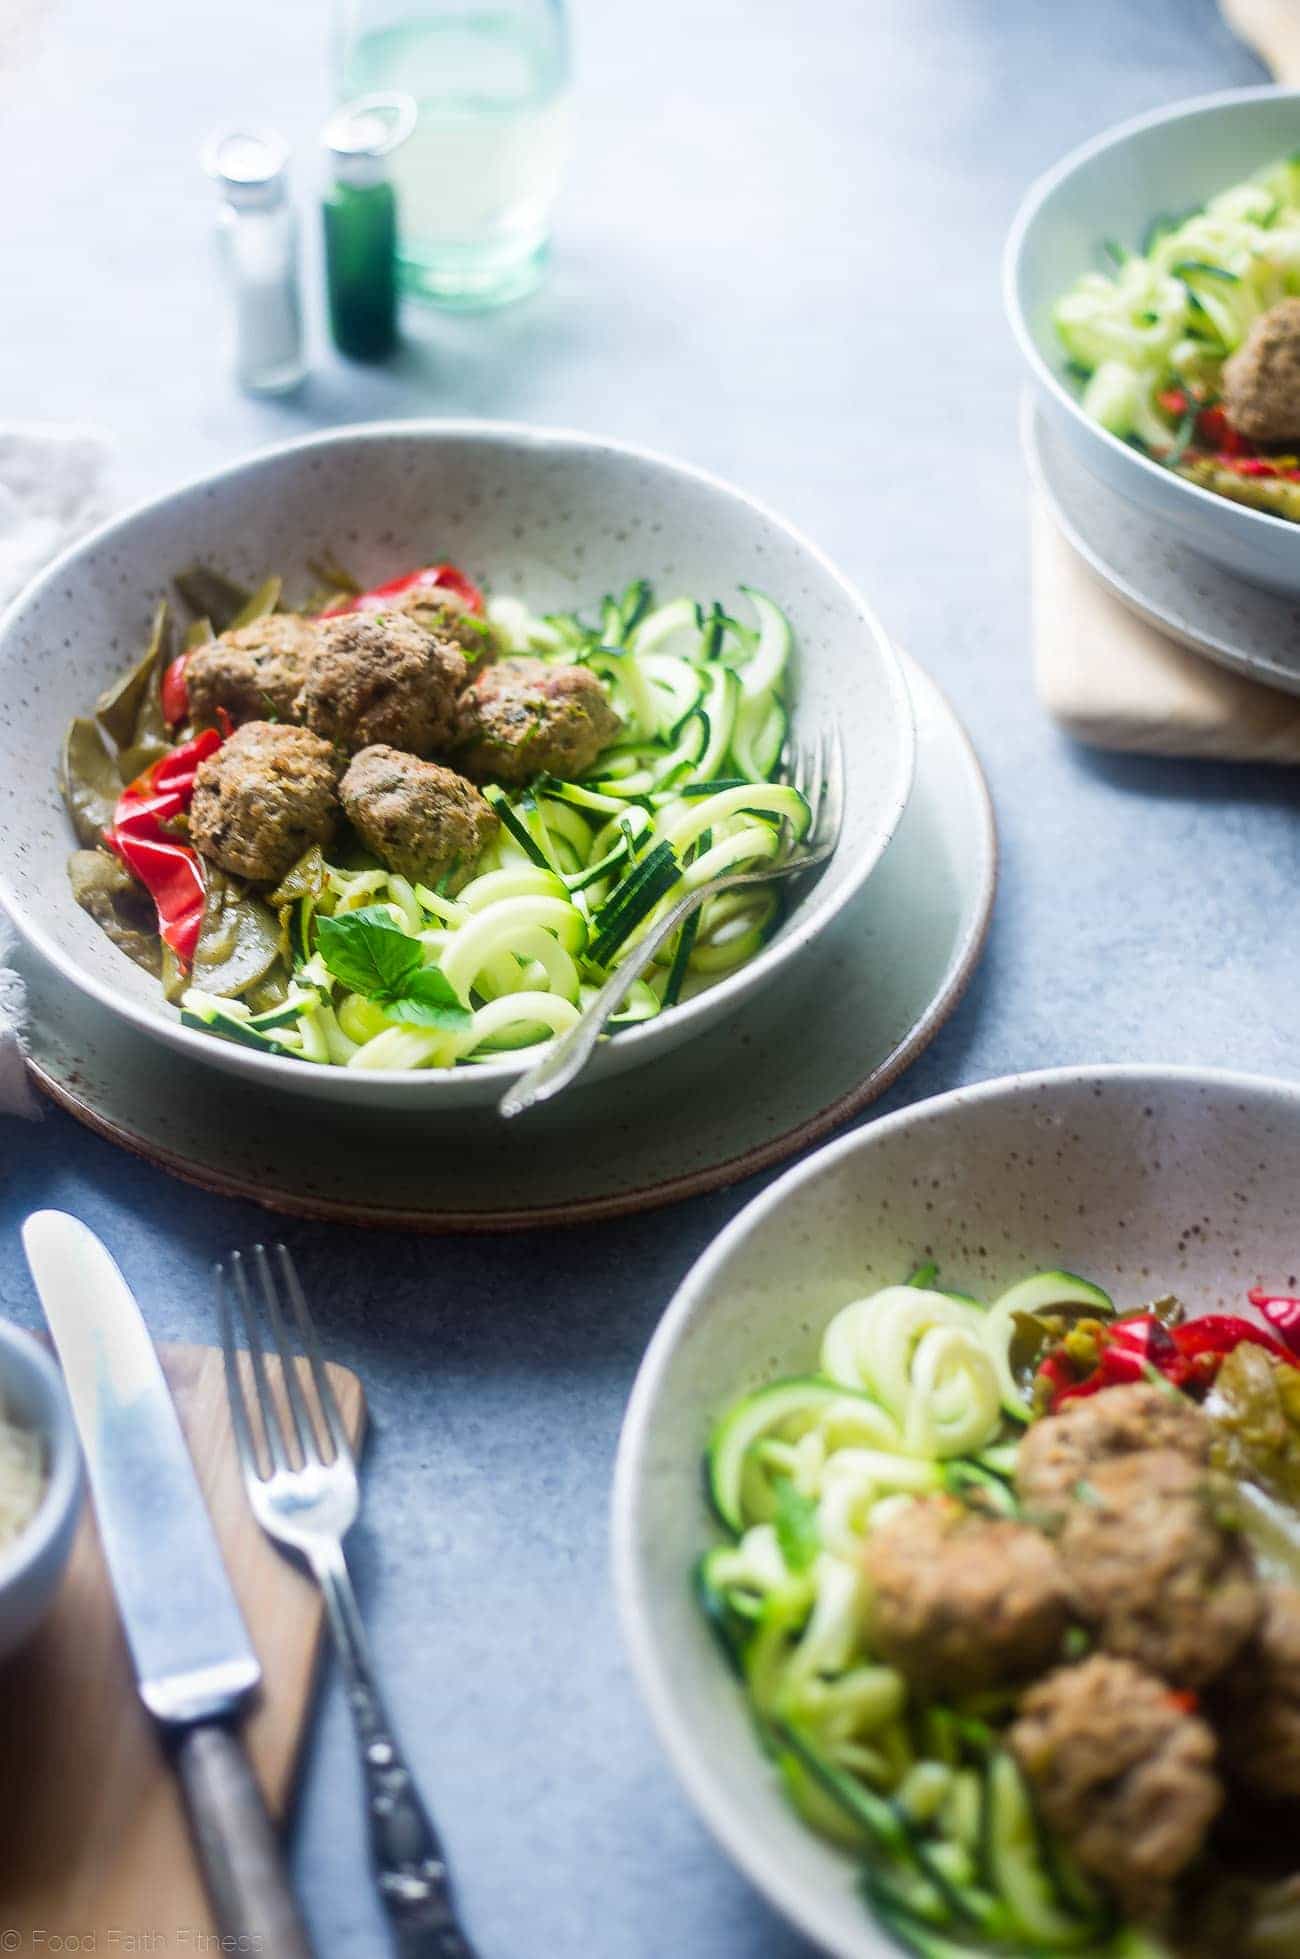 Whole30 Instant Pot Meatballs Primavera - These easy paleo Italian meatballs taste like pasta primavera! They're a healthy, gluten free and paleo spring meal for only 300 calories! | Foodfaithfitness.com | @FoodFaithFit